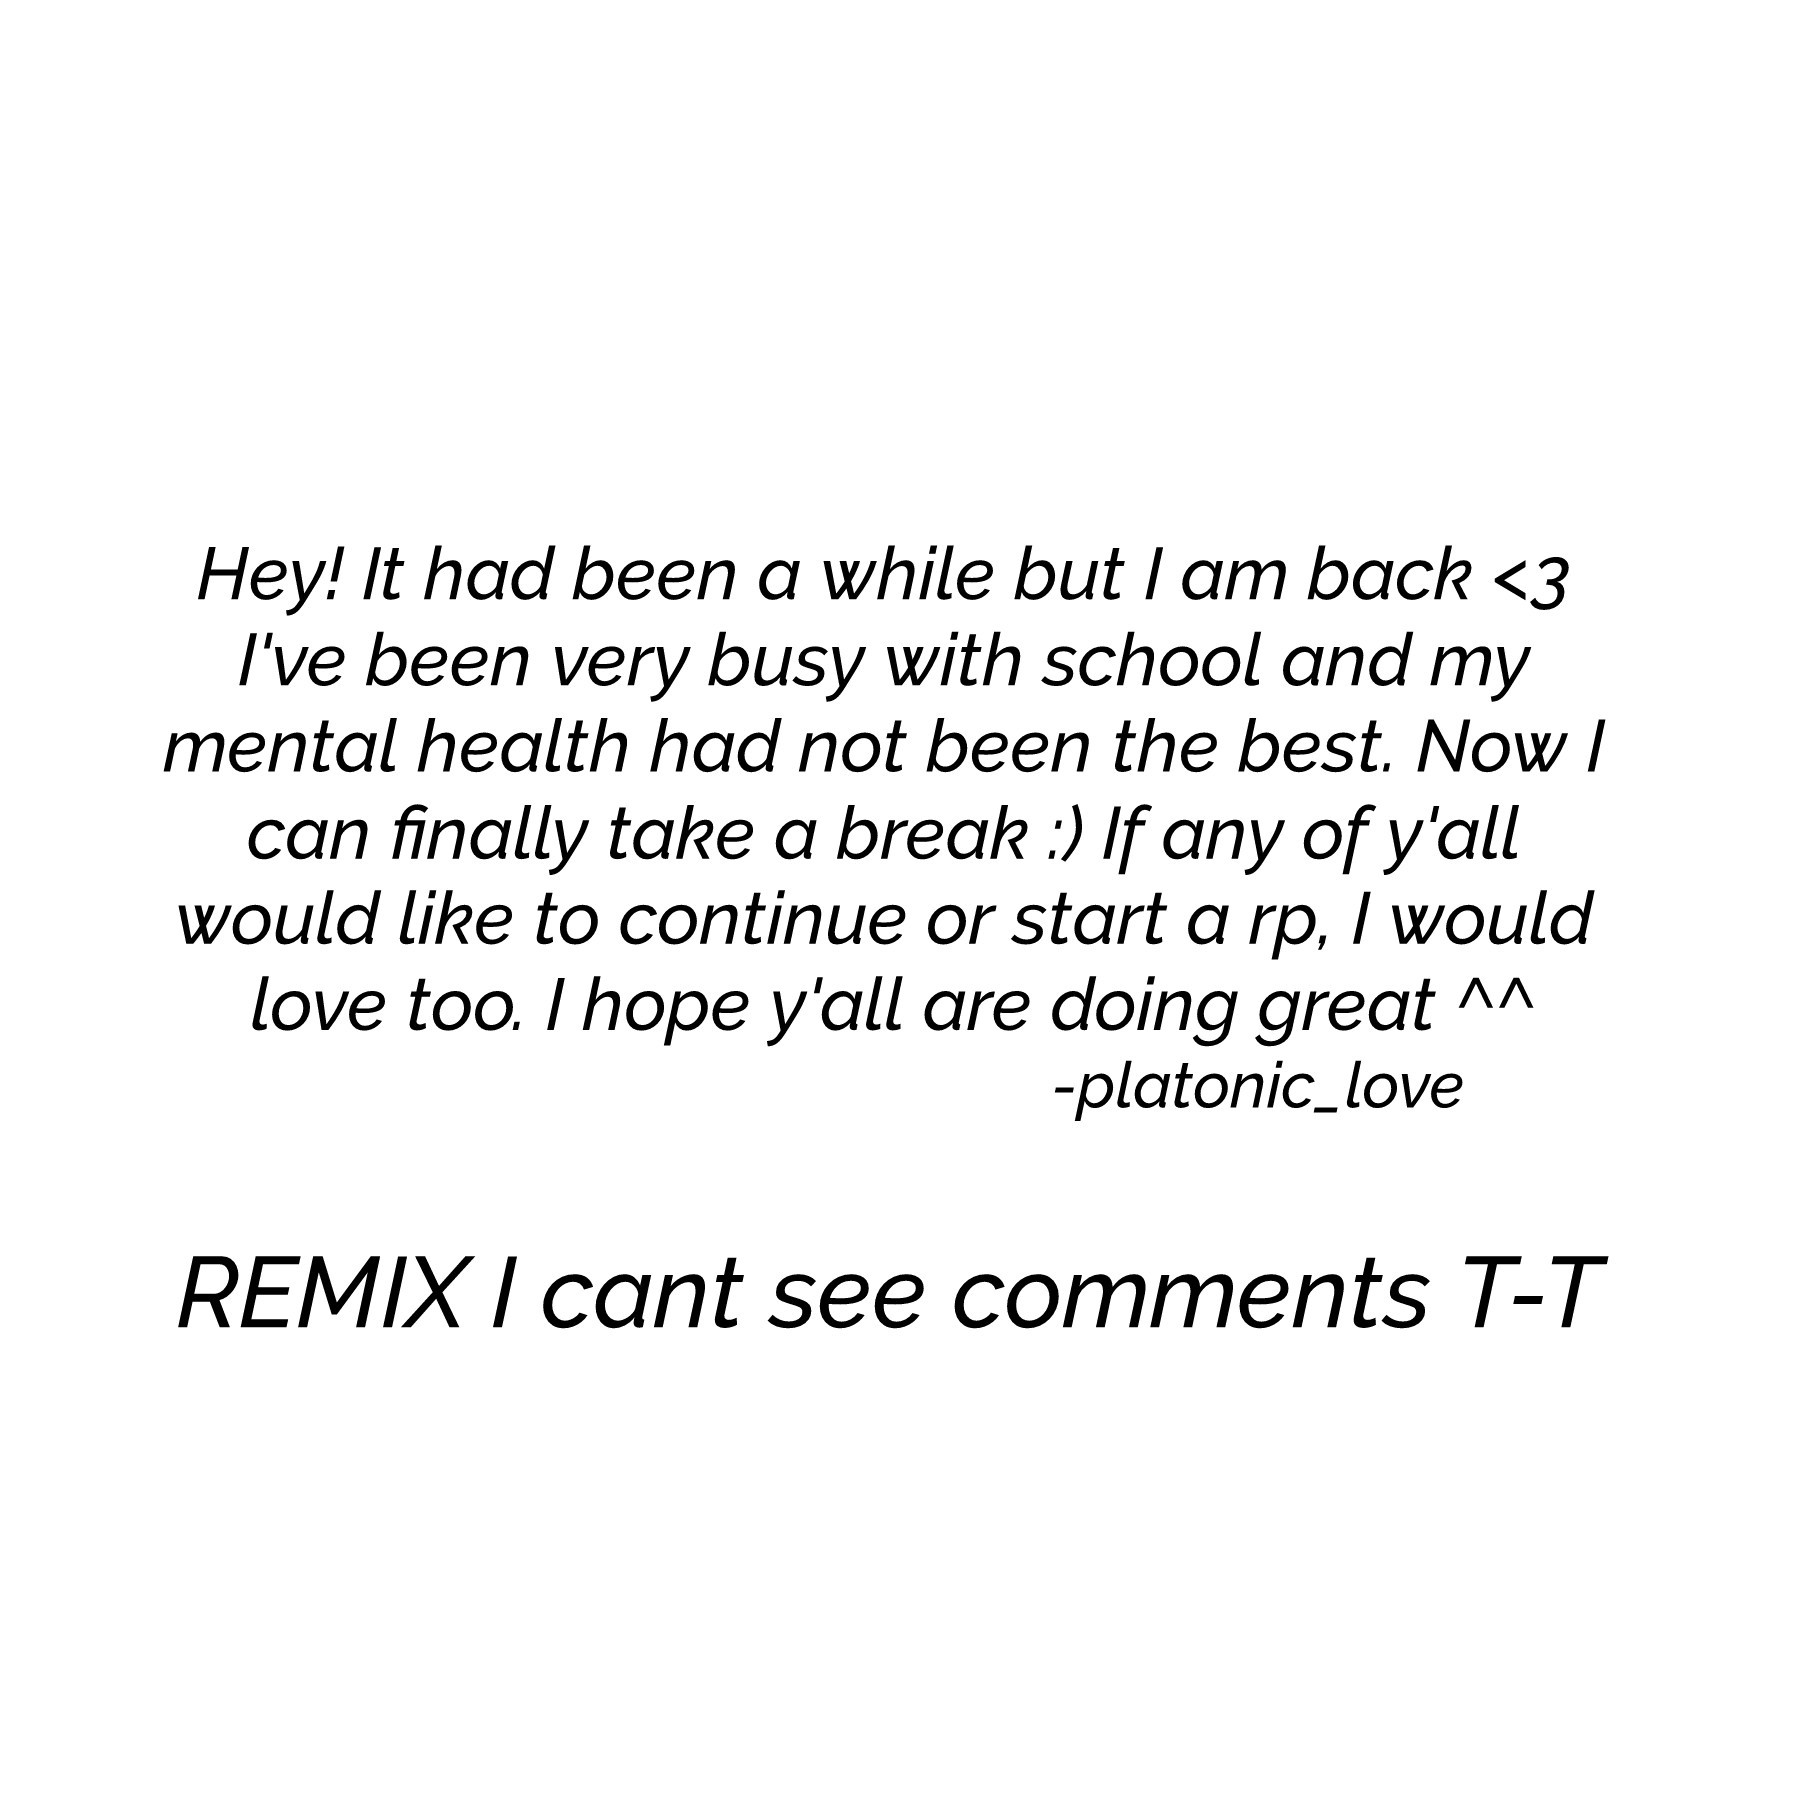 REMIX, i hope y'all are doing great 